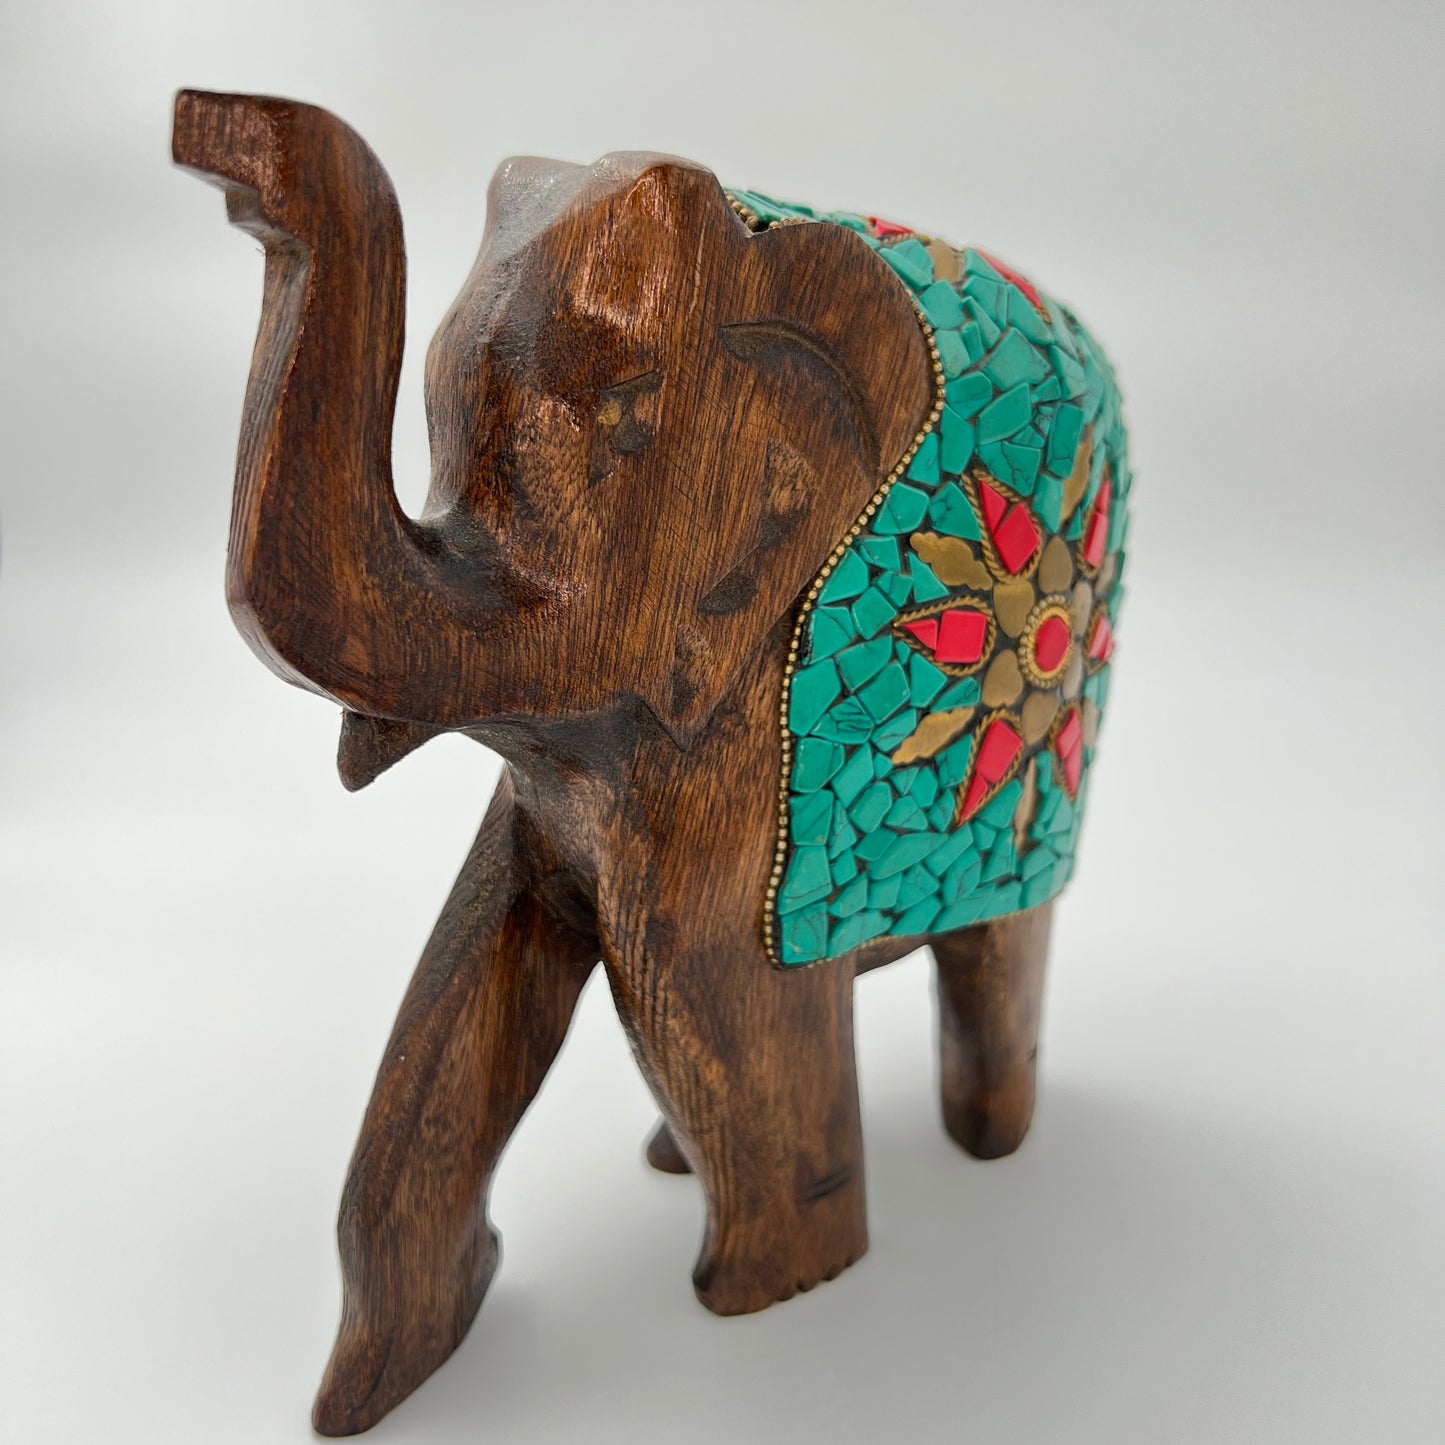 Image of Wooden Elephant with Stone Work. The Source India is an Indian Handicraft, Home Decor, Furnishing and Textiles Store. Our Mission is to allow the enhancement of India's Culture